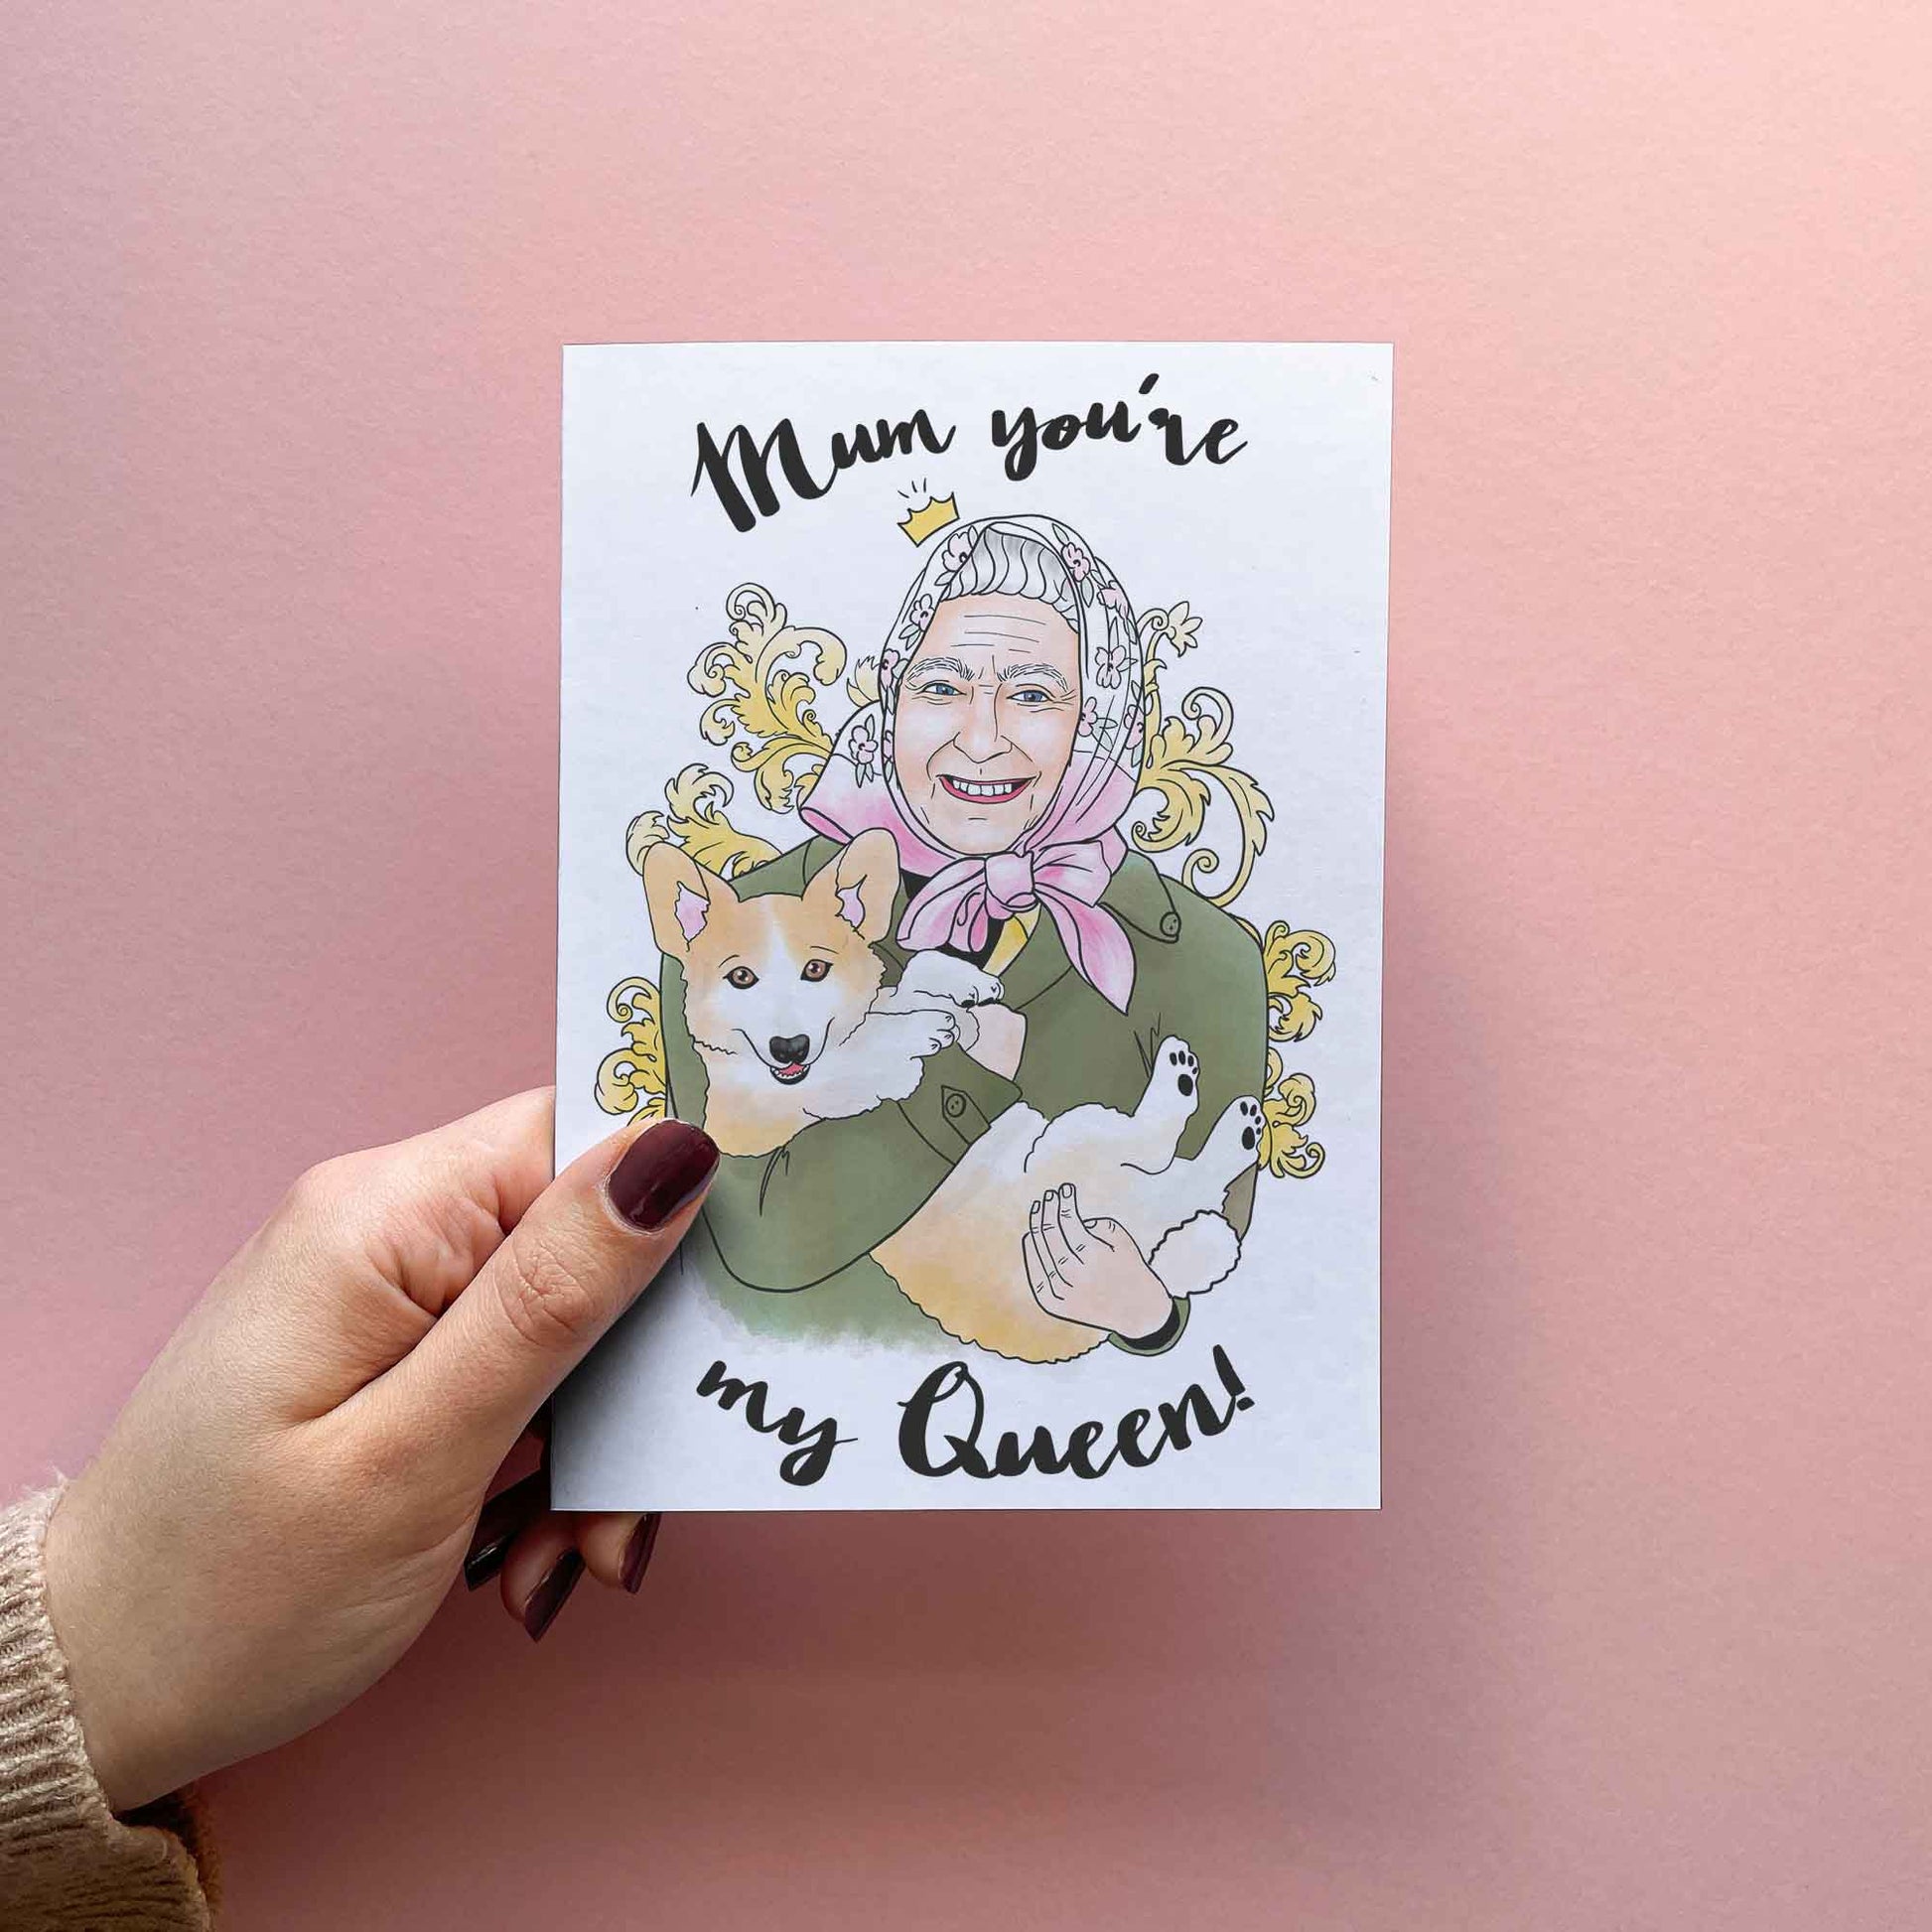 funny mothers day card for mum. Mother's Day ideas for mom. Greeting card featuring an cute illustration of the queen holding a corgi, reading Mum you're my queen!